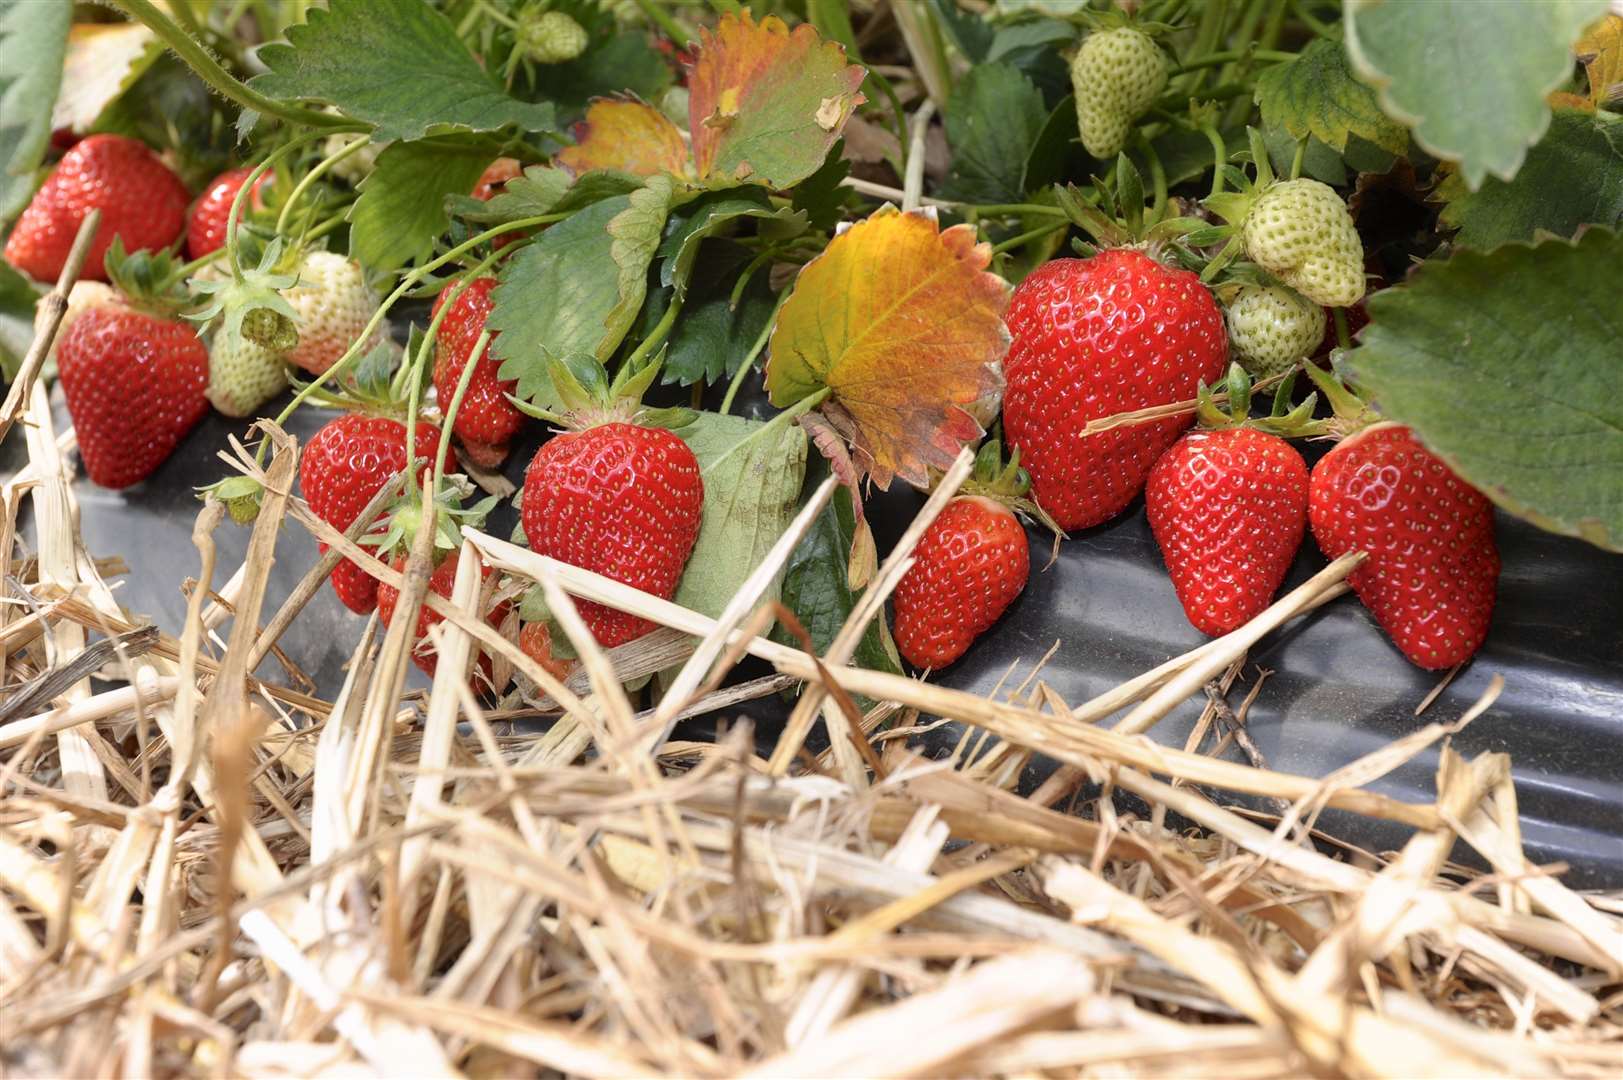 Strawberries grown at Mockbeggar farm used to be sold at Wimbledon